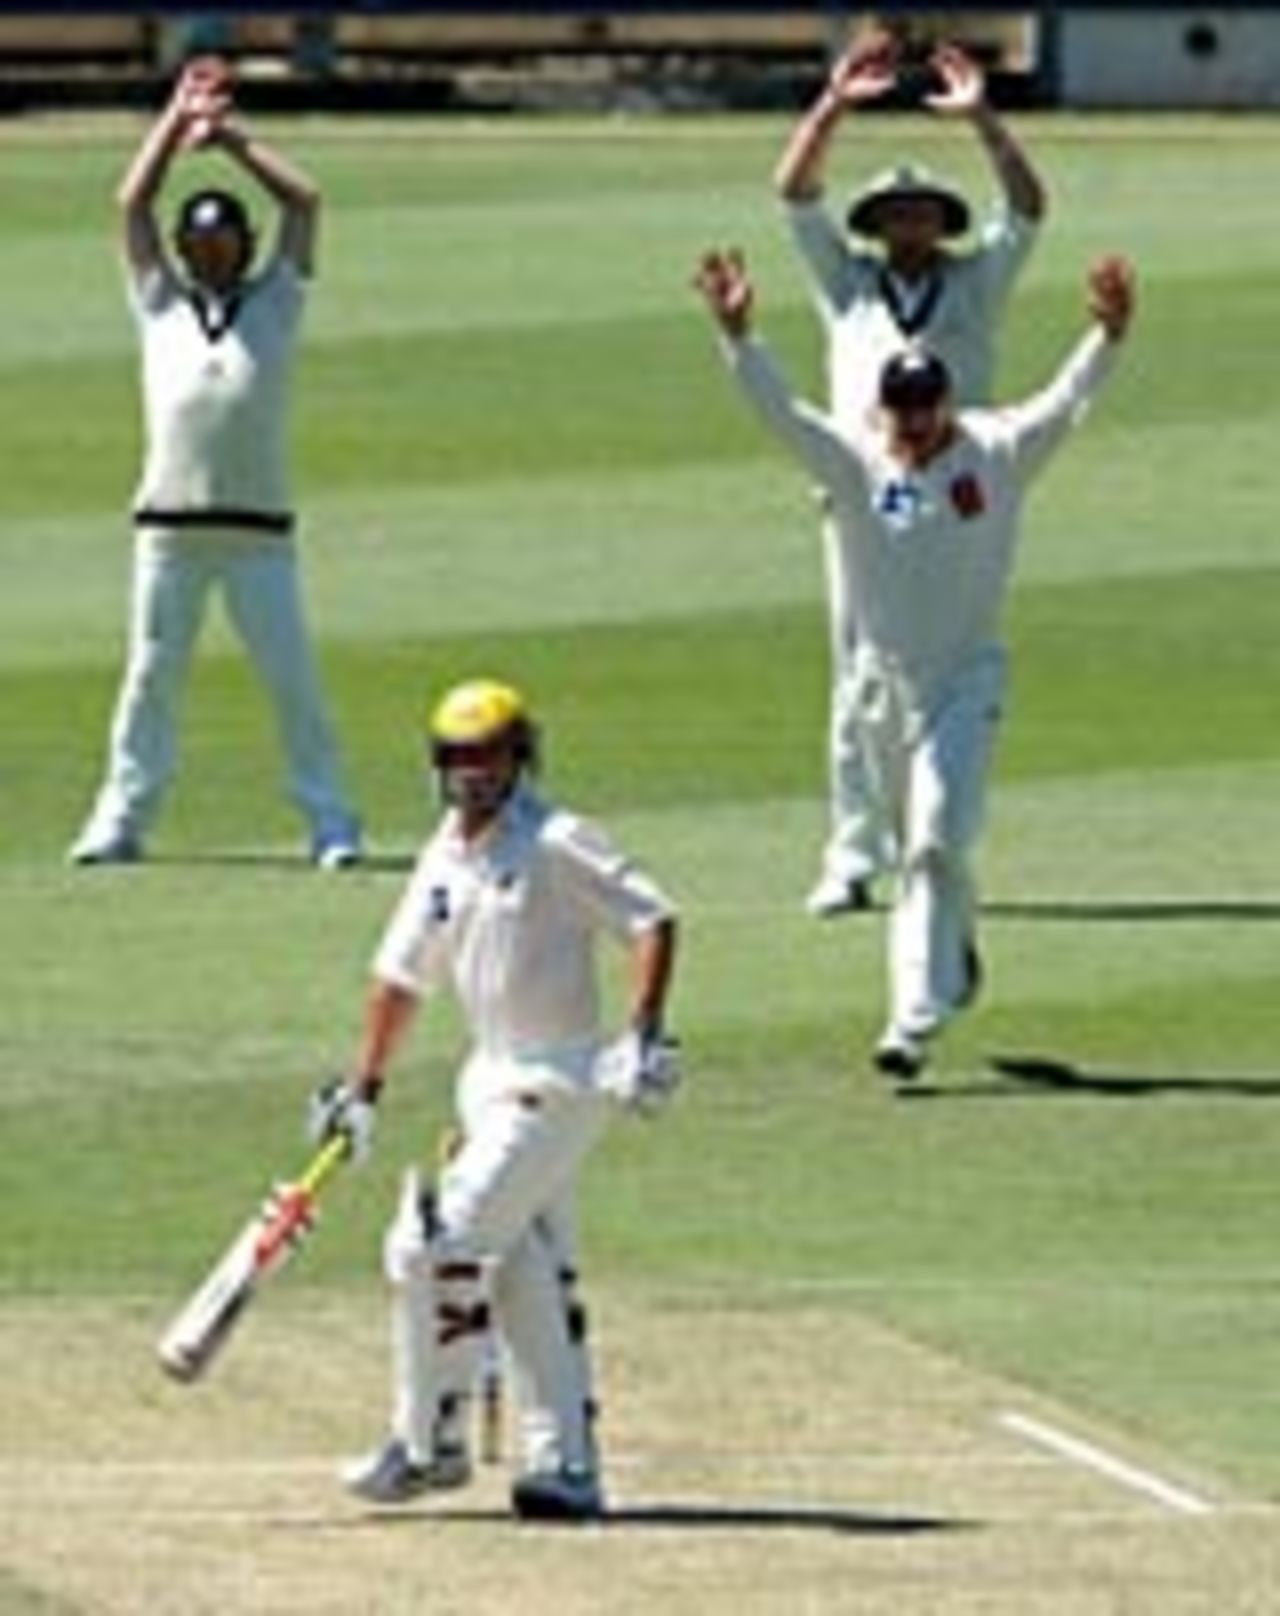 Brad Hogg is caught by wicketkeeper Peter Roach, Western Australia v Victoria, Perth, December 20, 2003